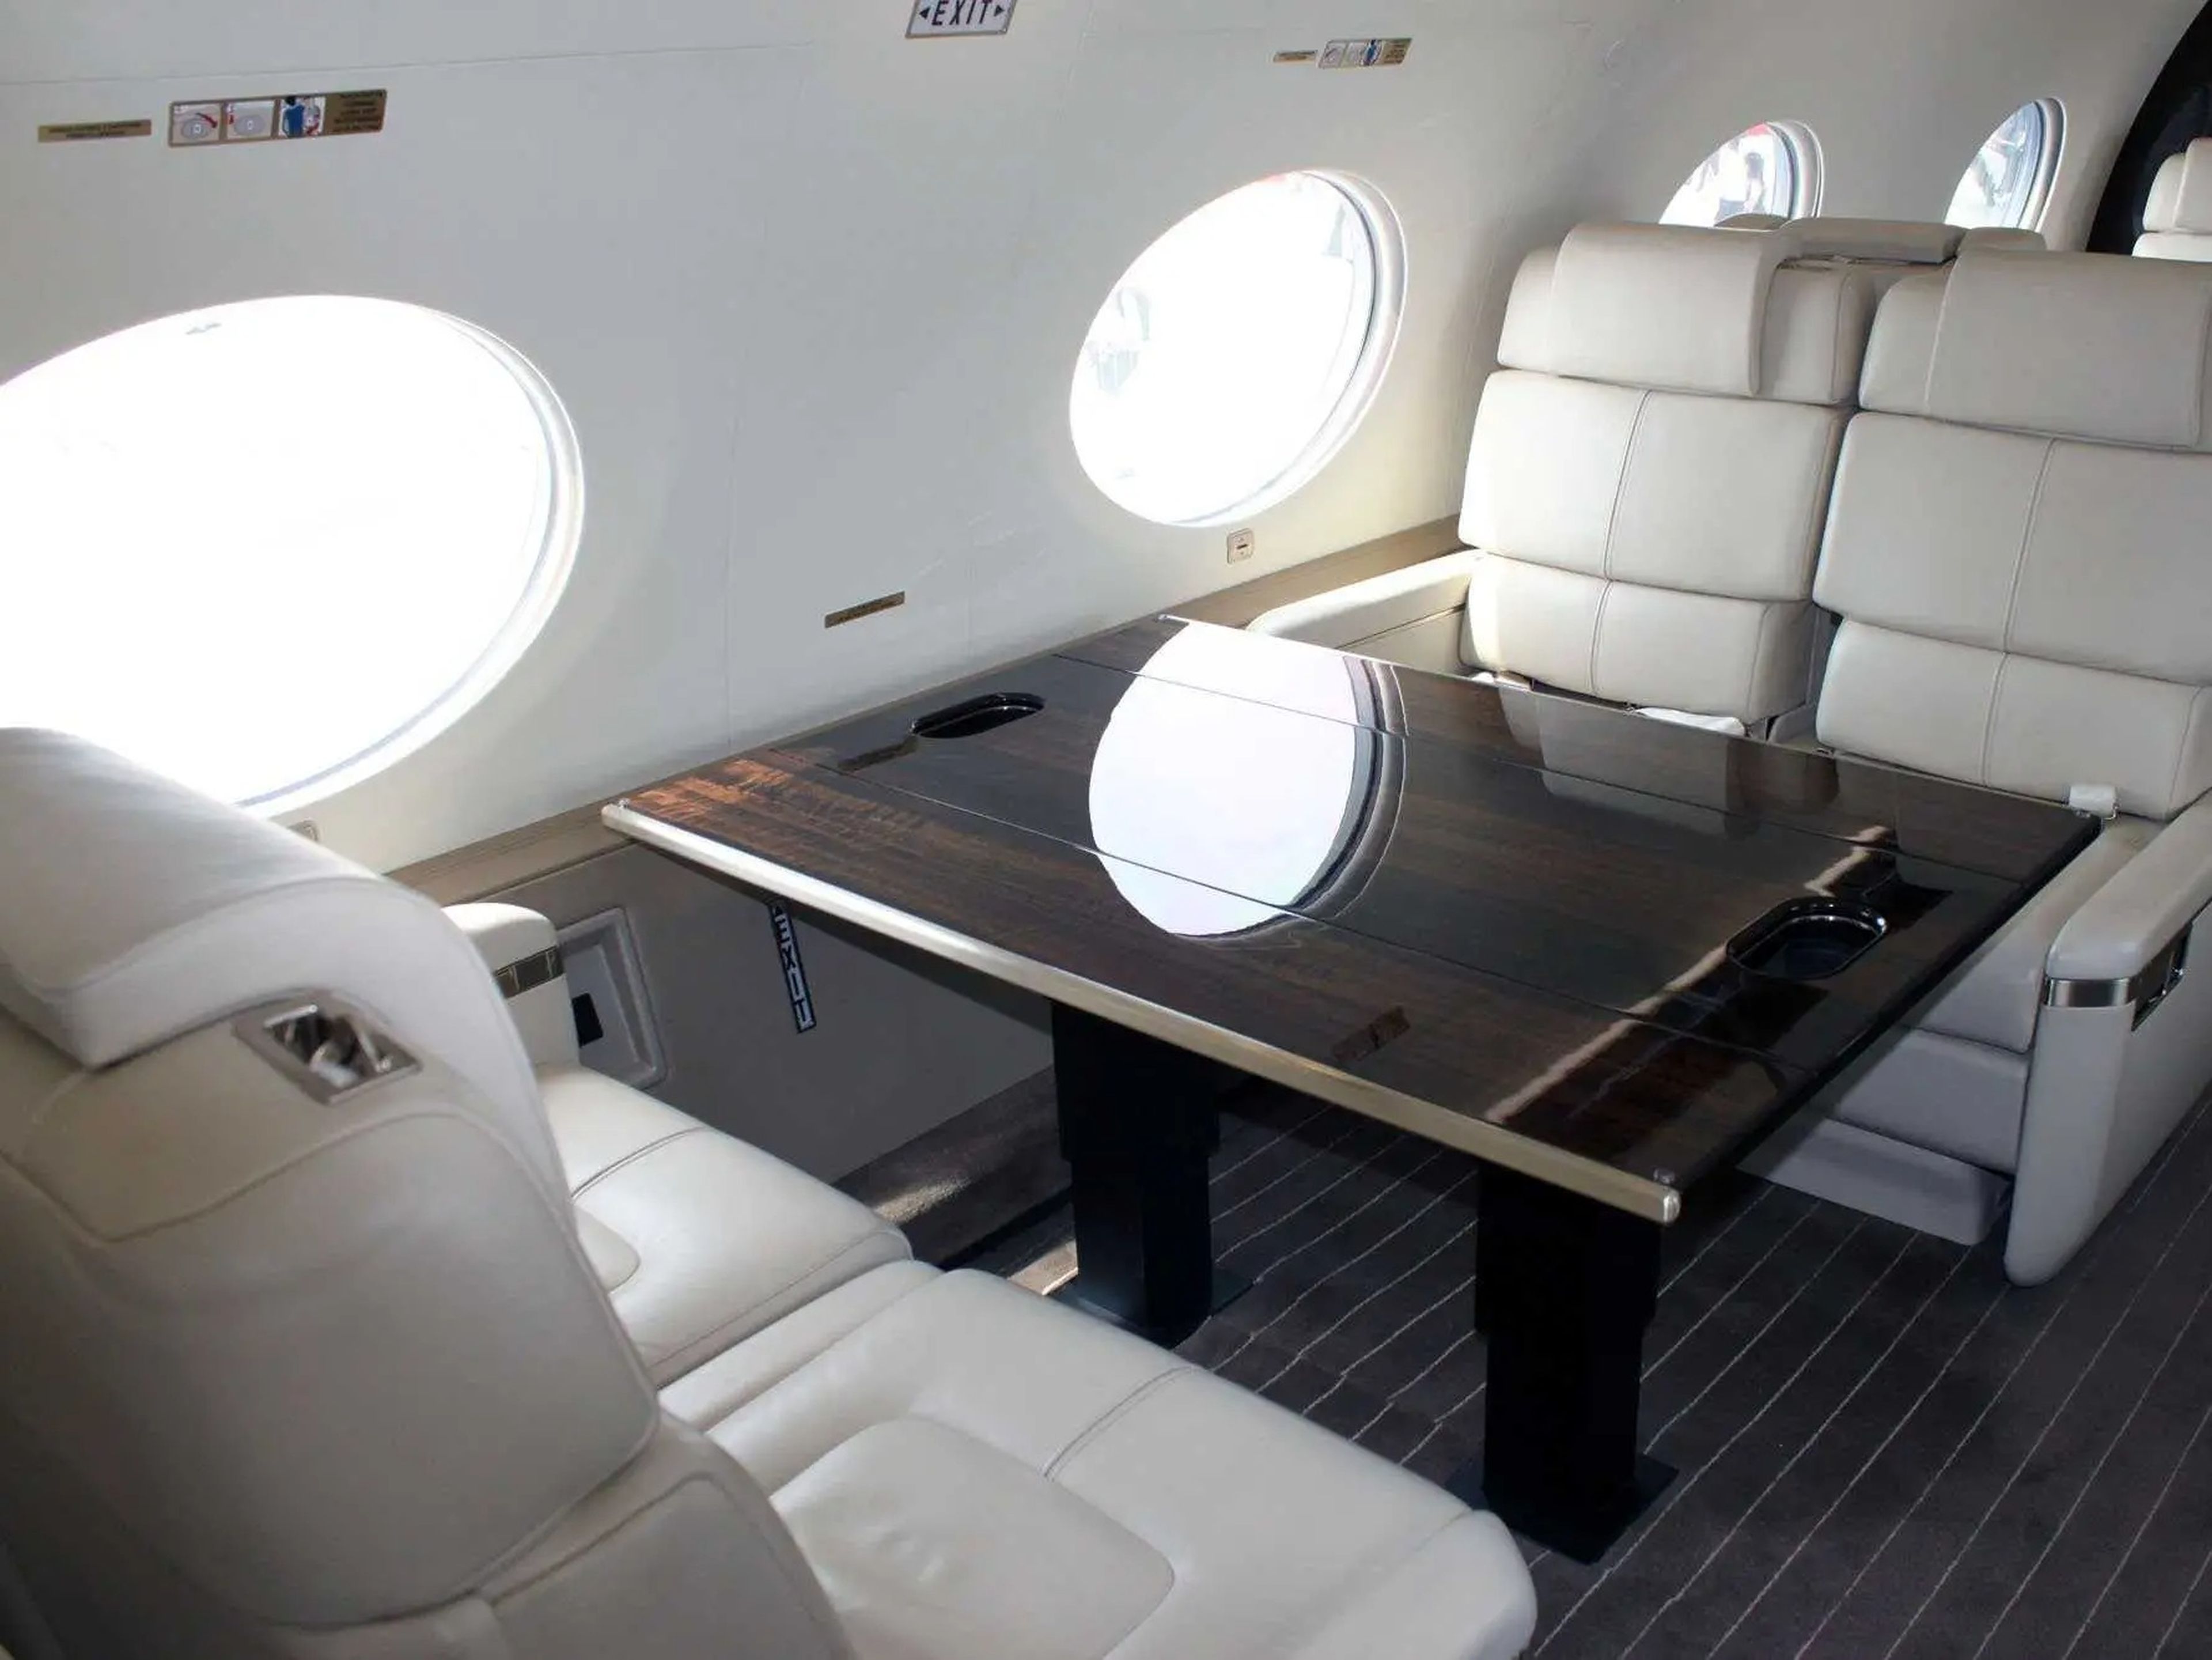 A row of seats around a table in the cabin of a Gulfstream G650 private jet.